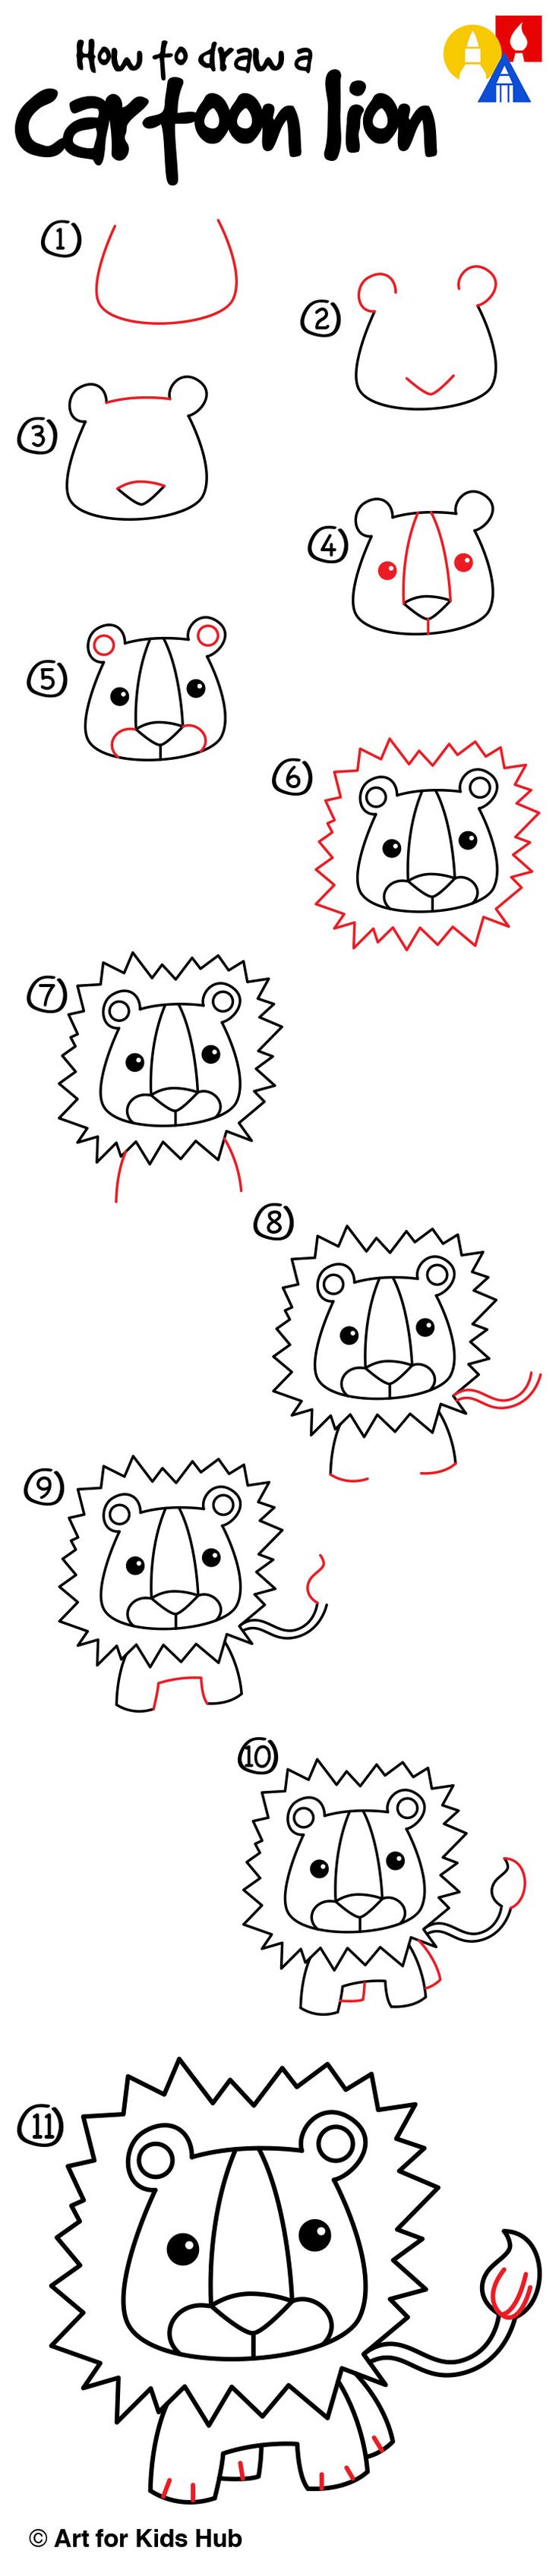 Learn how to draw a cartoon lion